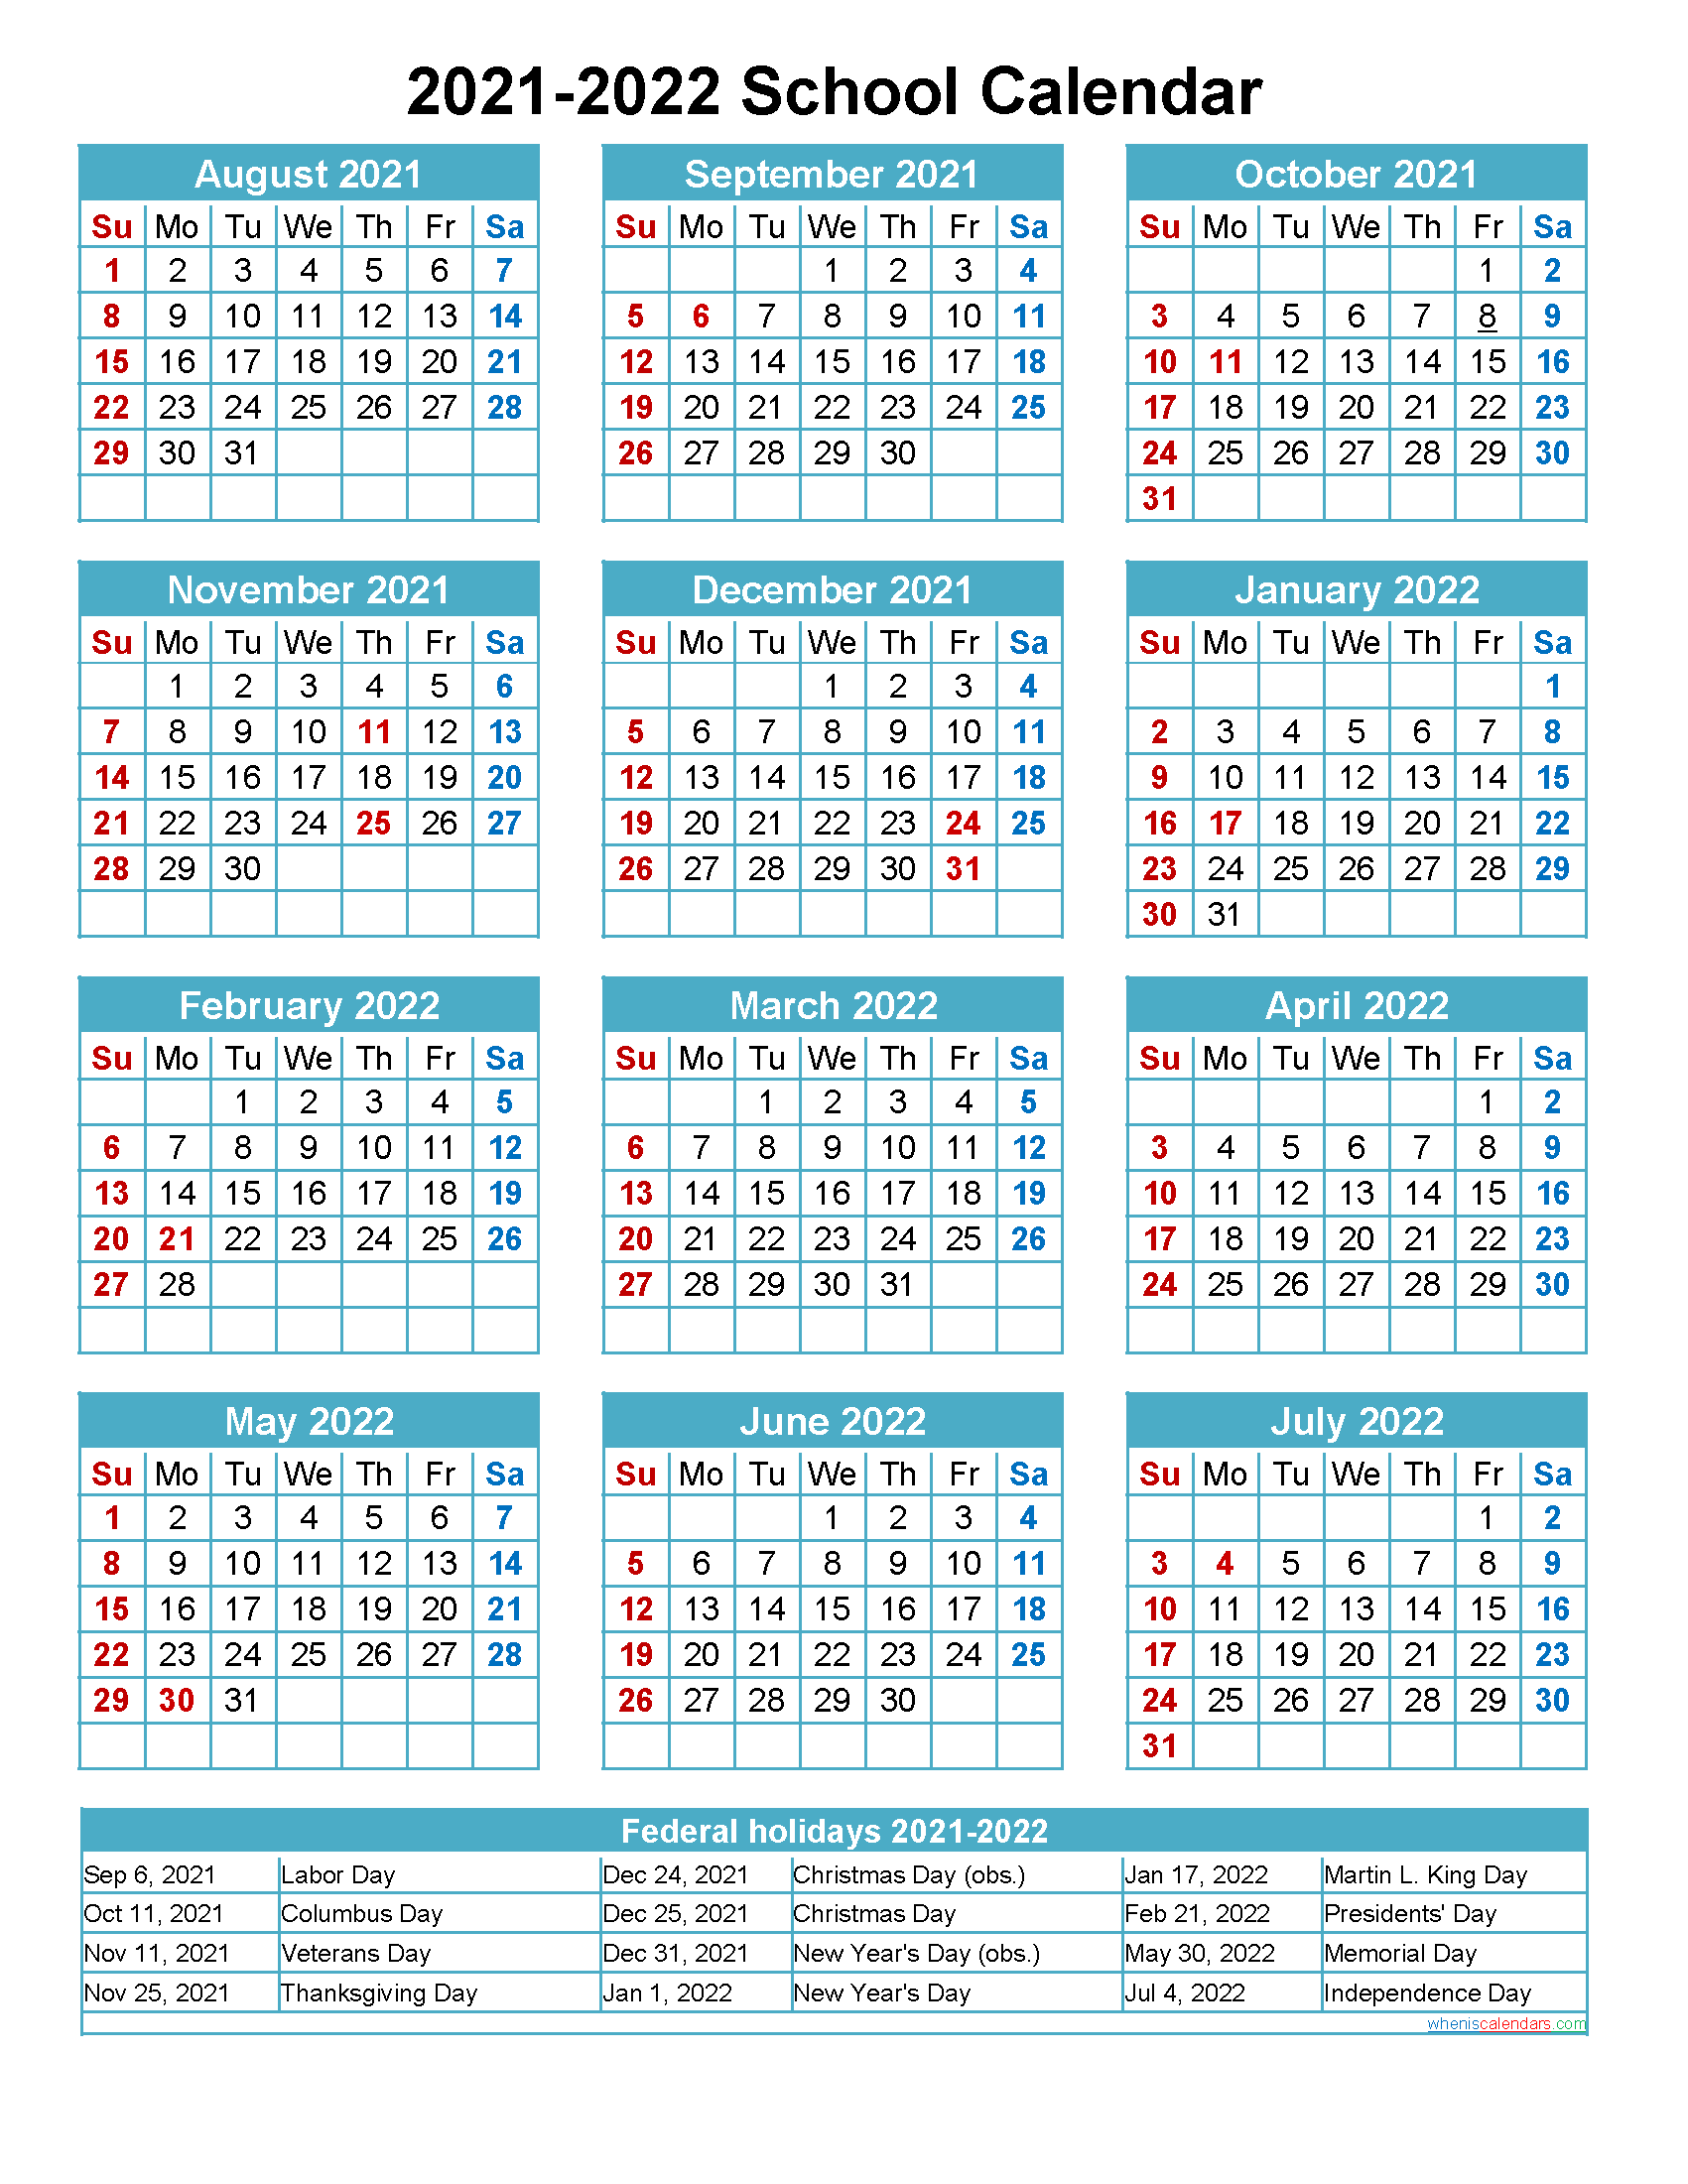 Download Free School Calendar 2020 to 2021 as PDF and Image